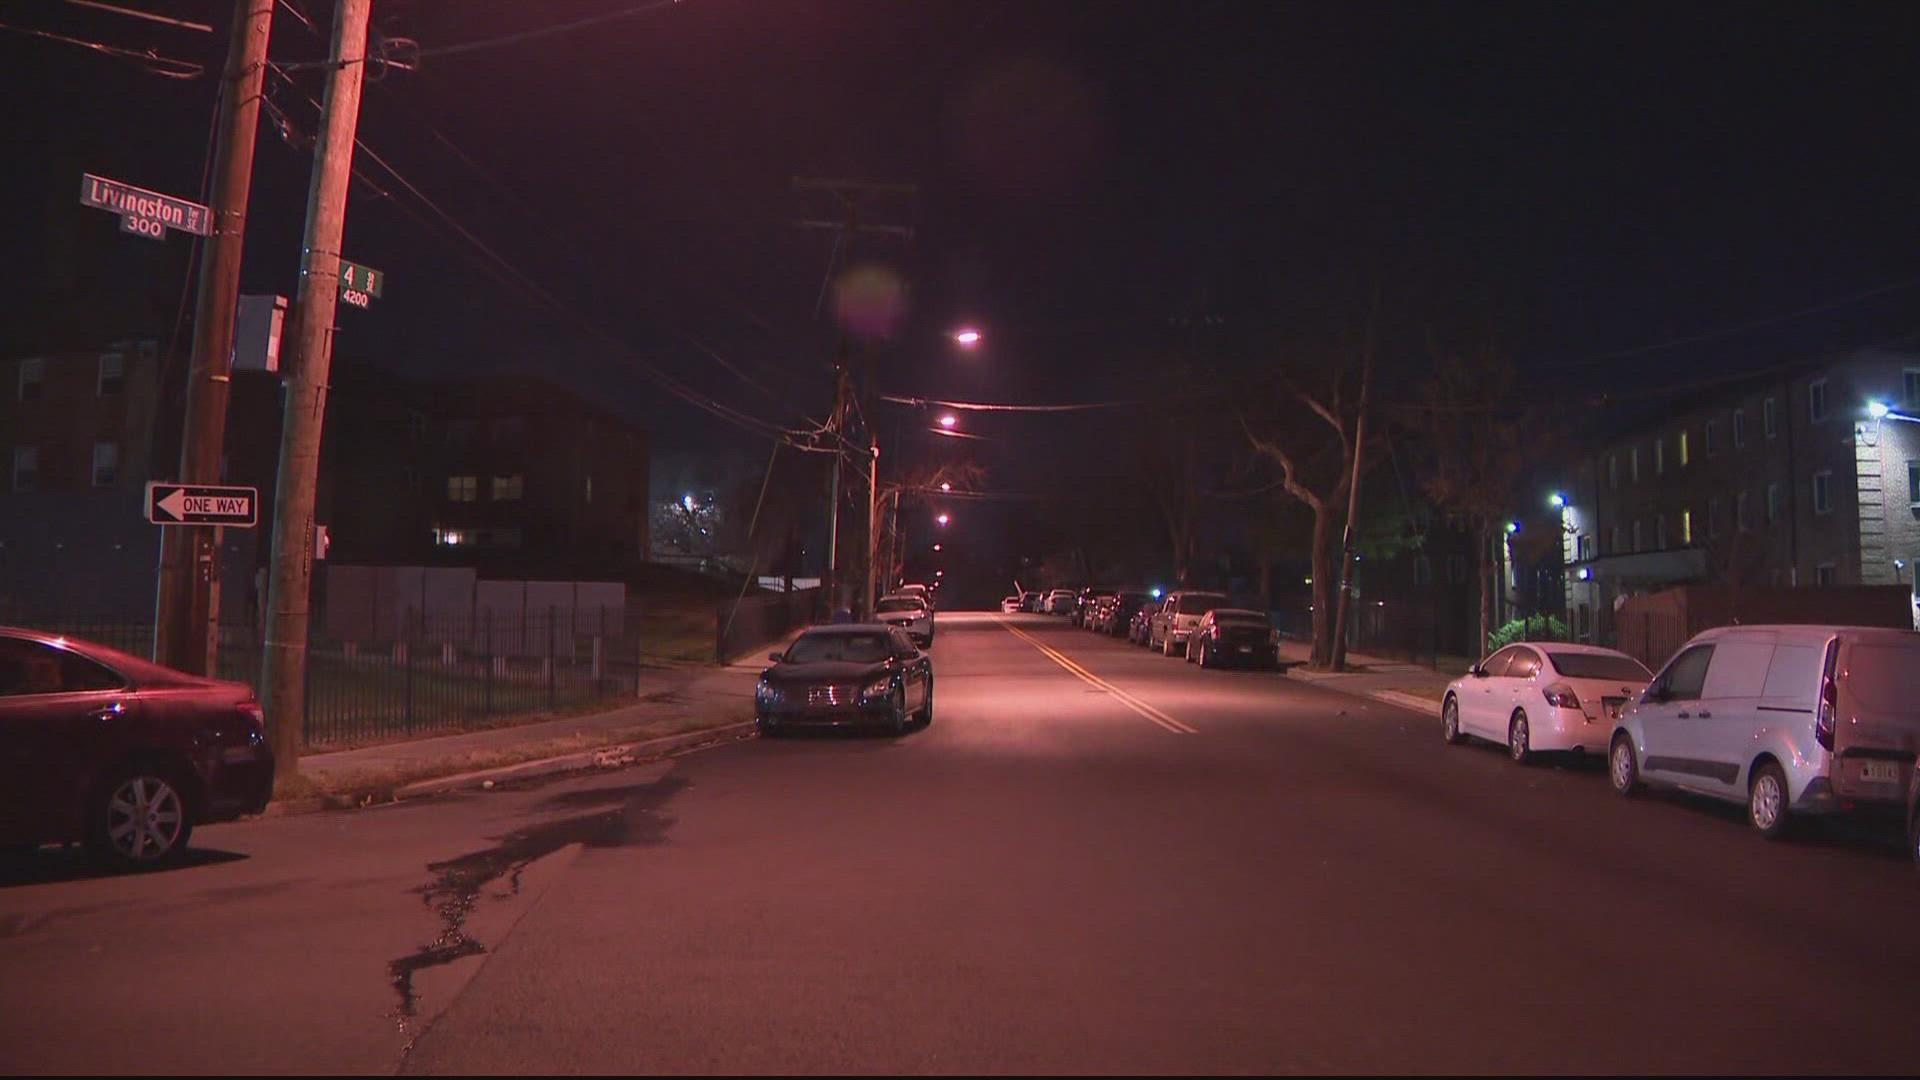 The call came in around 11 p.m. for a reported shooting inside an apartment complex.